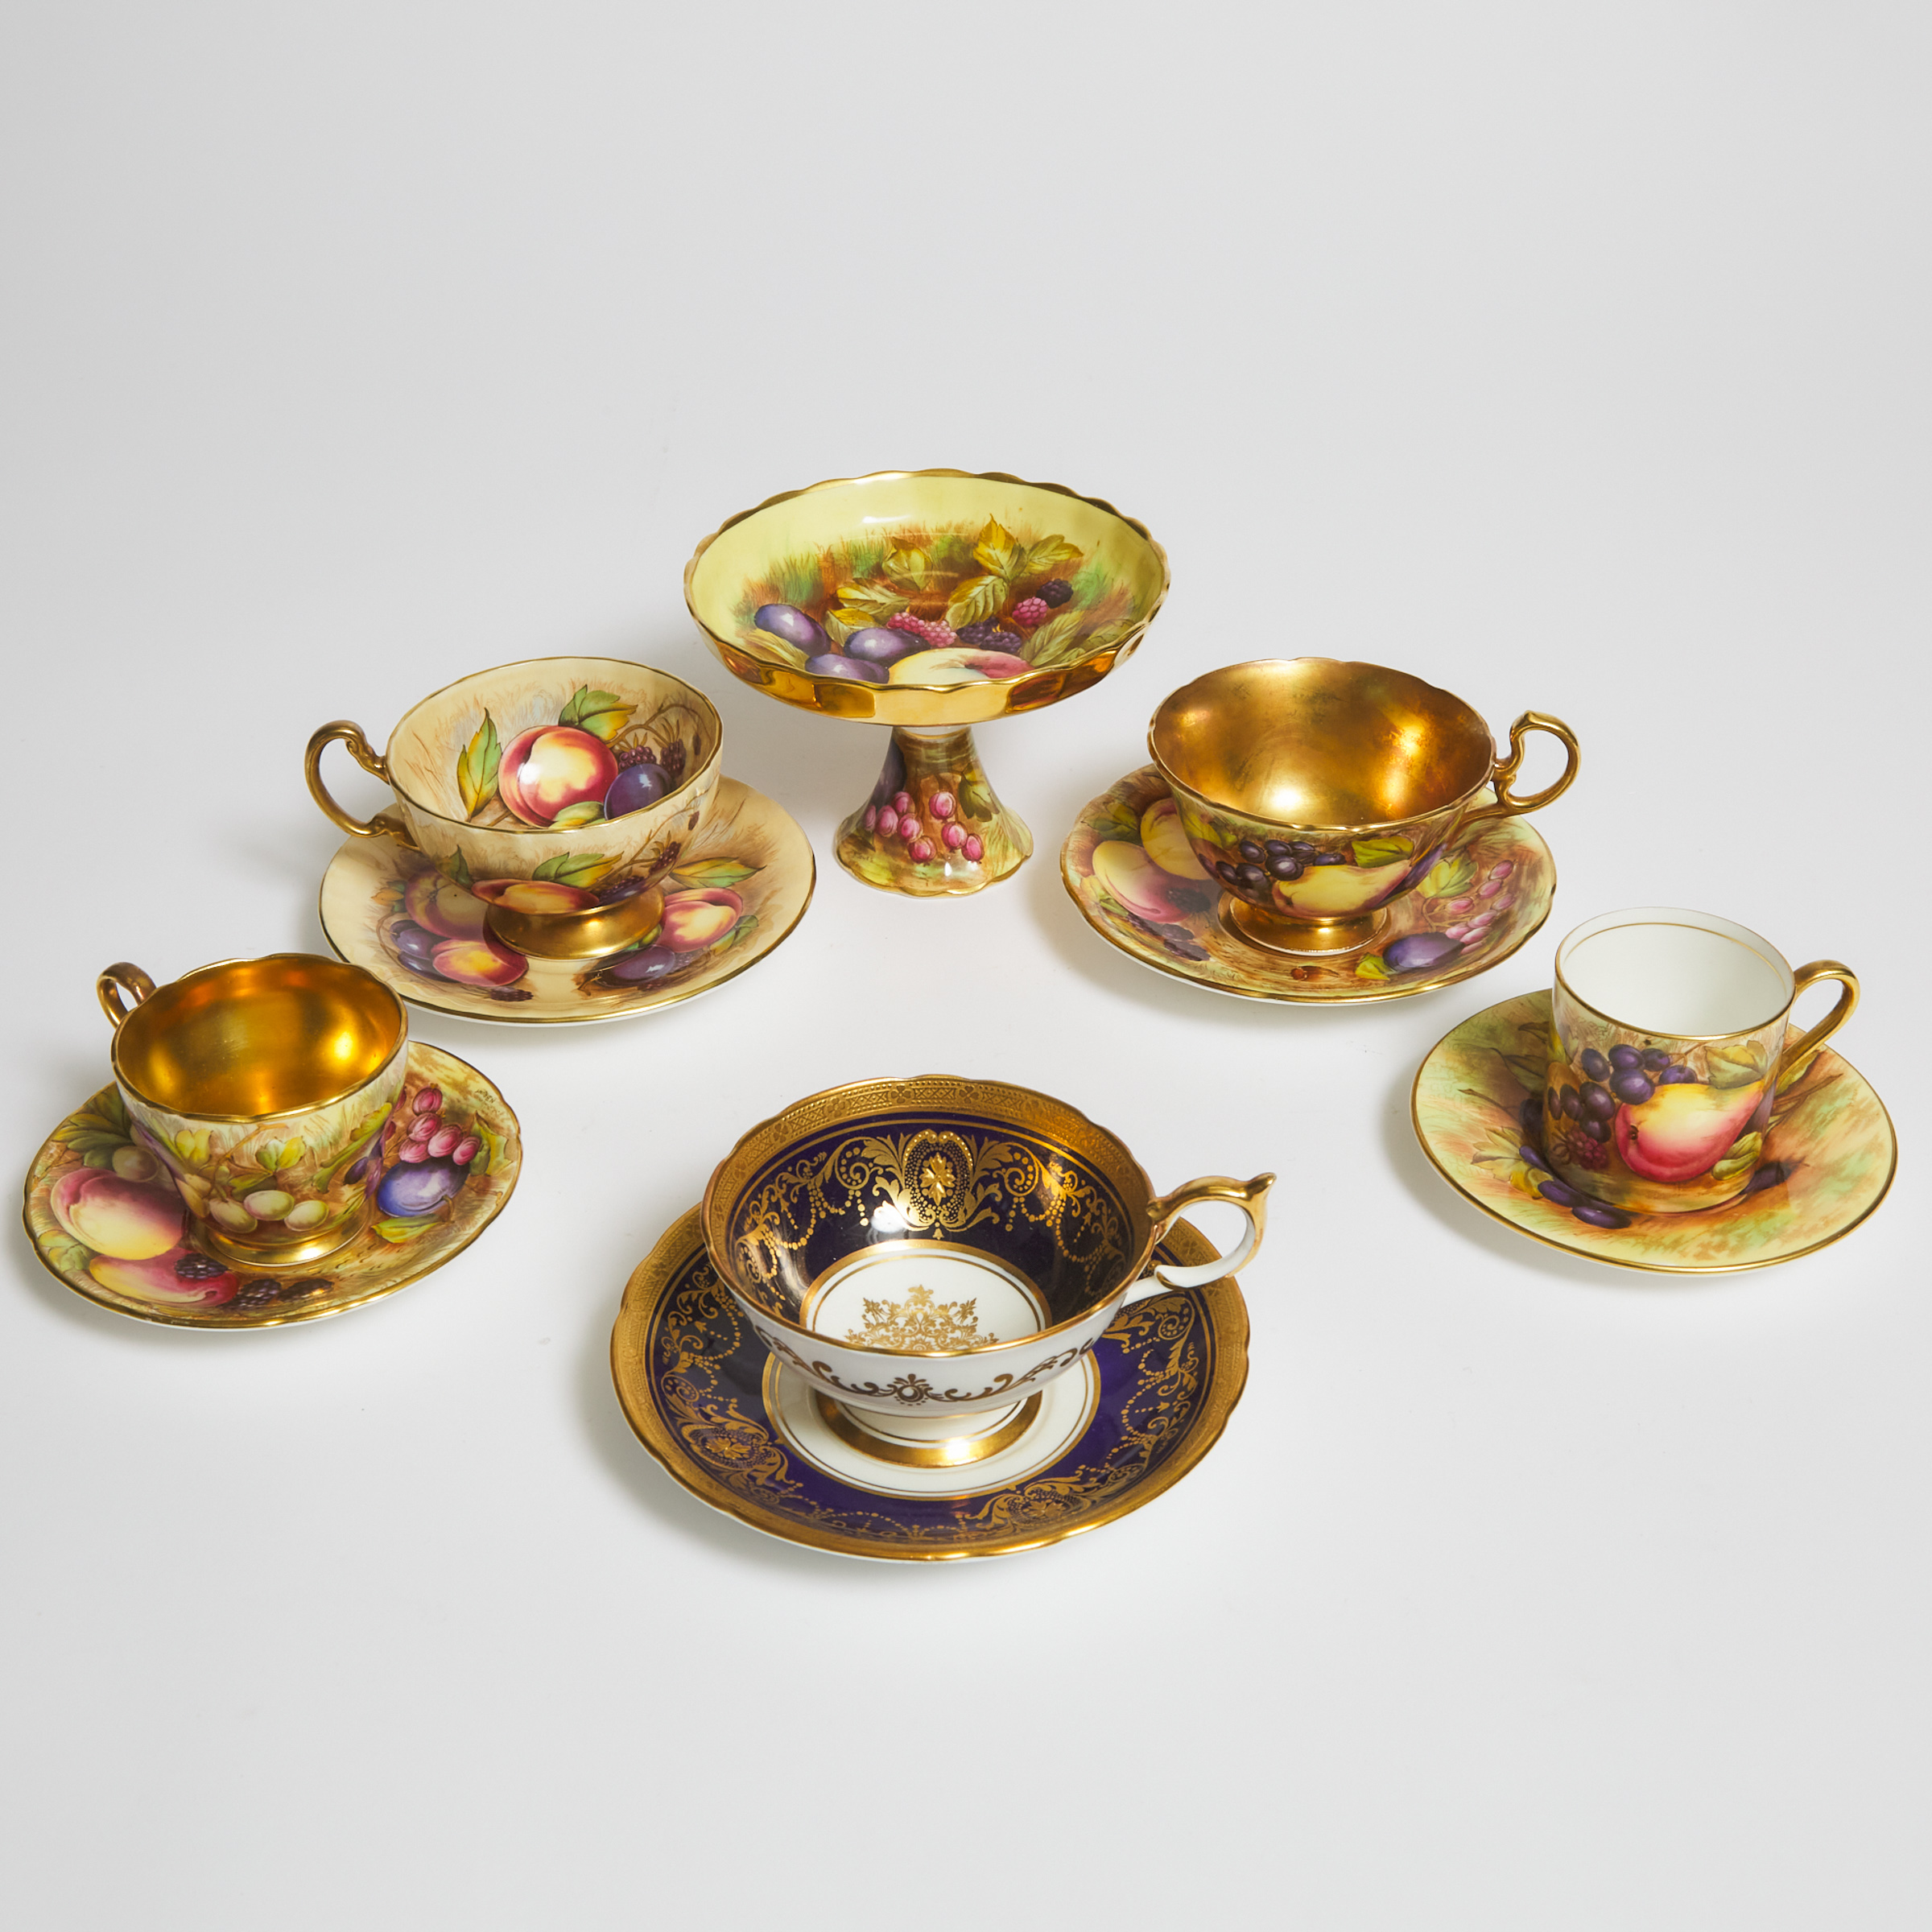 Five Aynsley Cups and Saucers and a Small Comport, 20th century